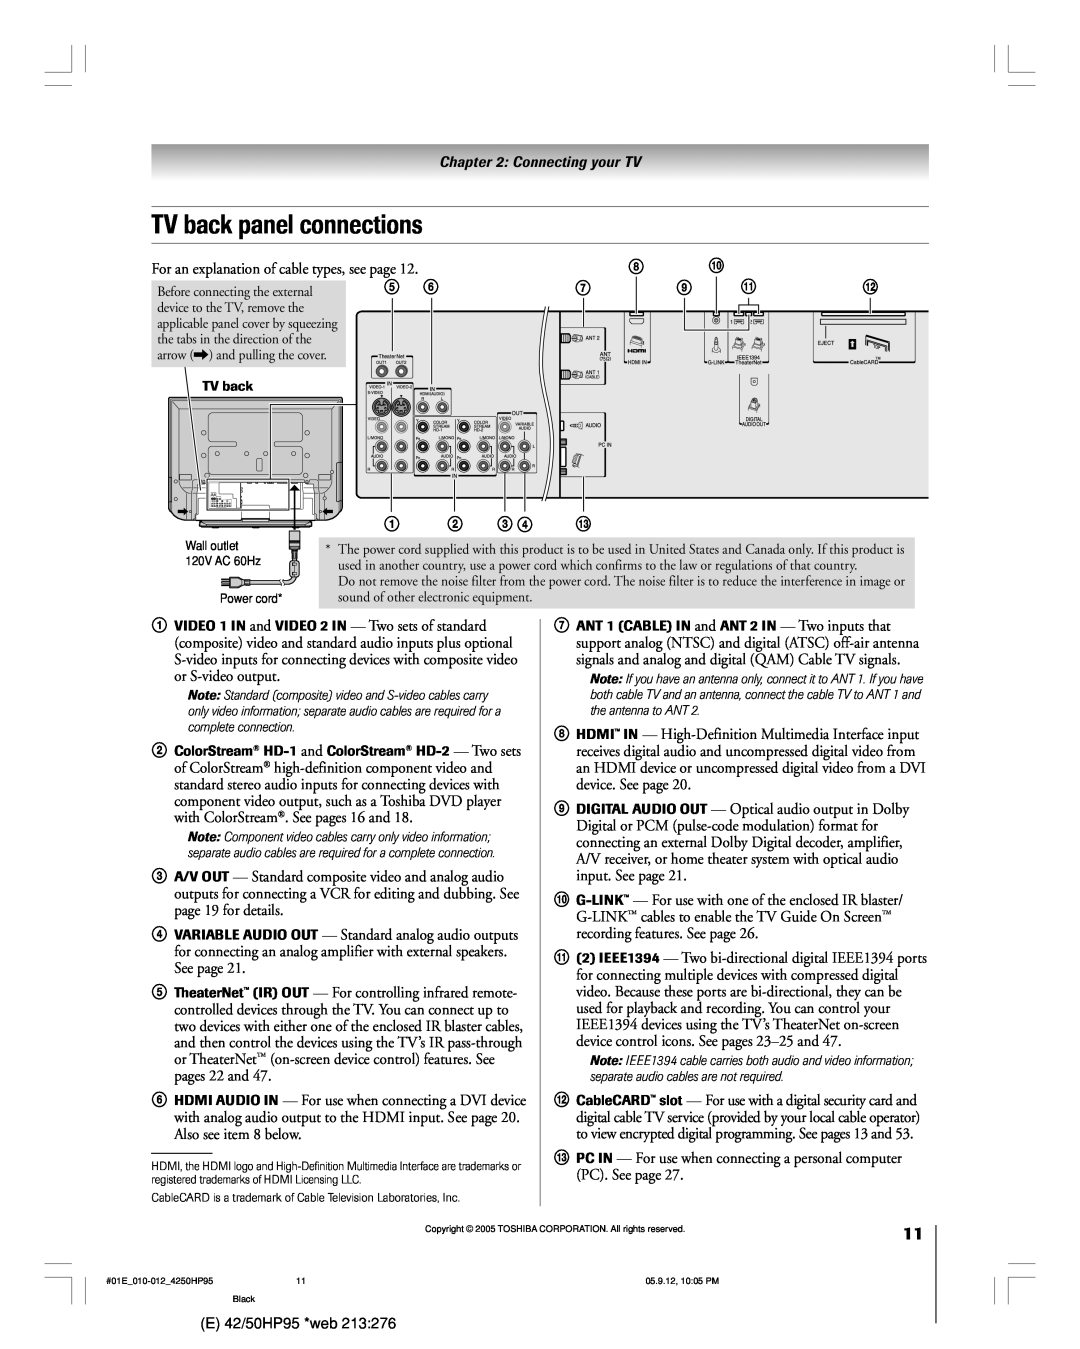 Toshiba 42HP95 owner manual TV back panel connections 